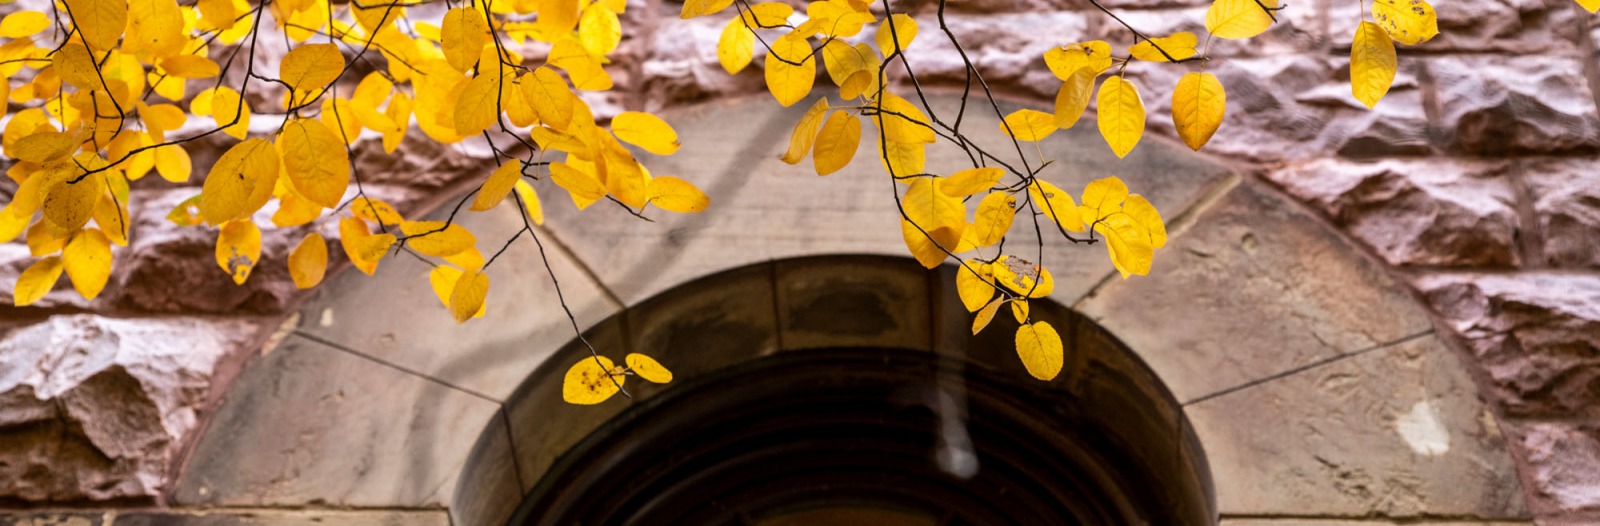 Yellow leaves in front of arched window